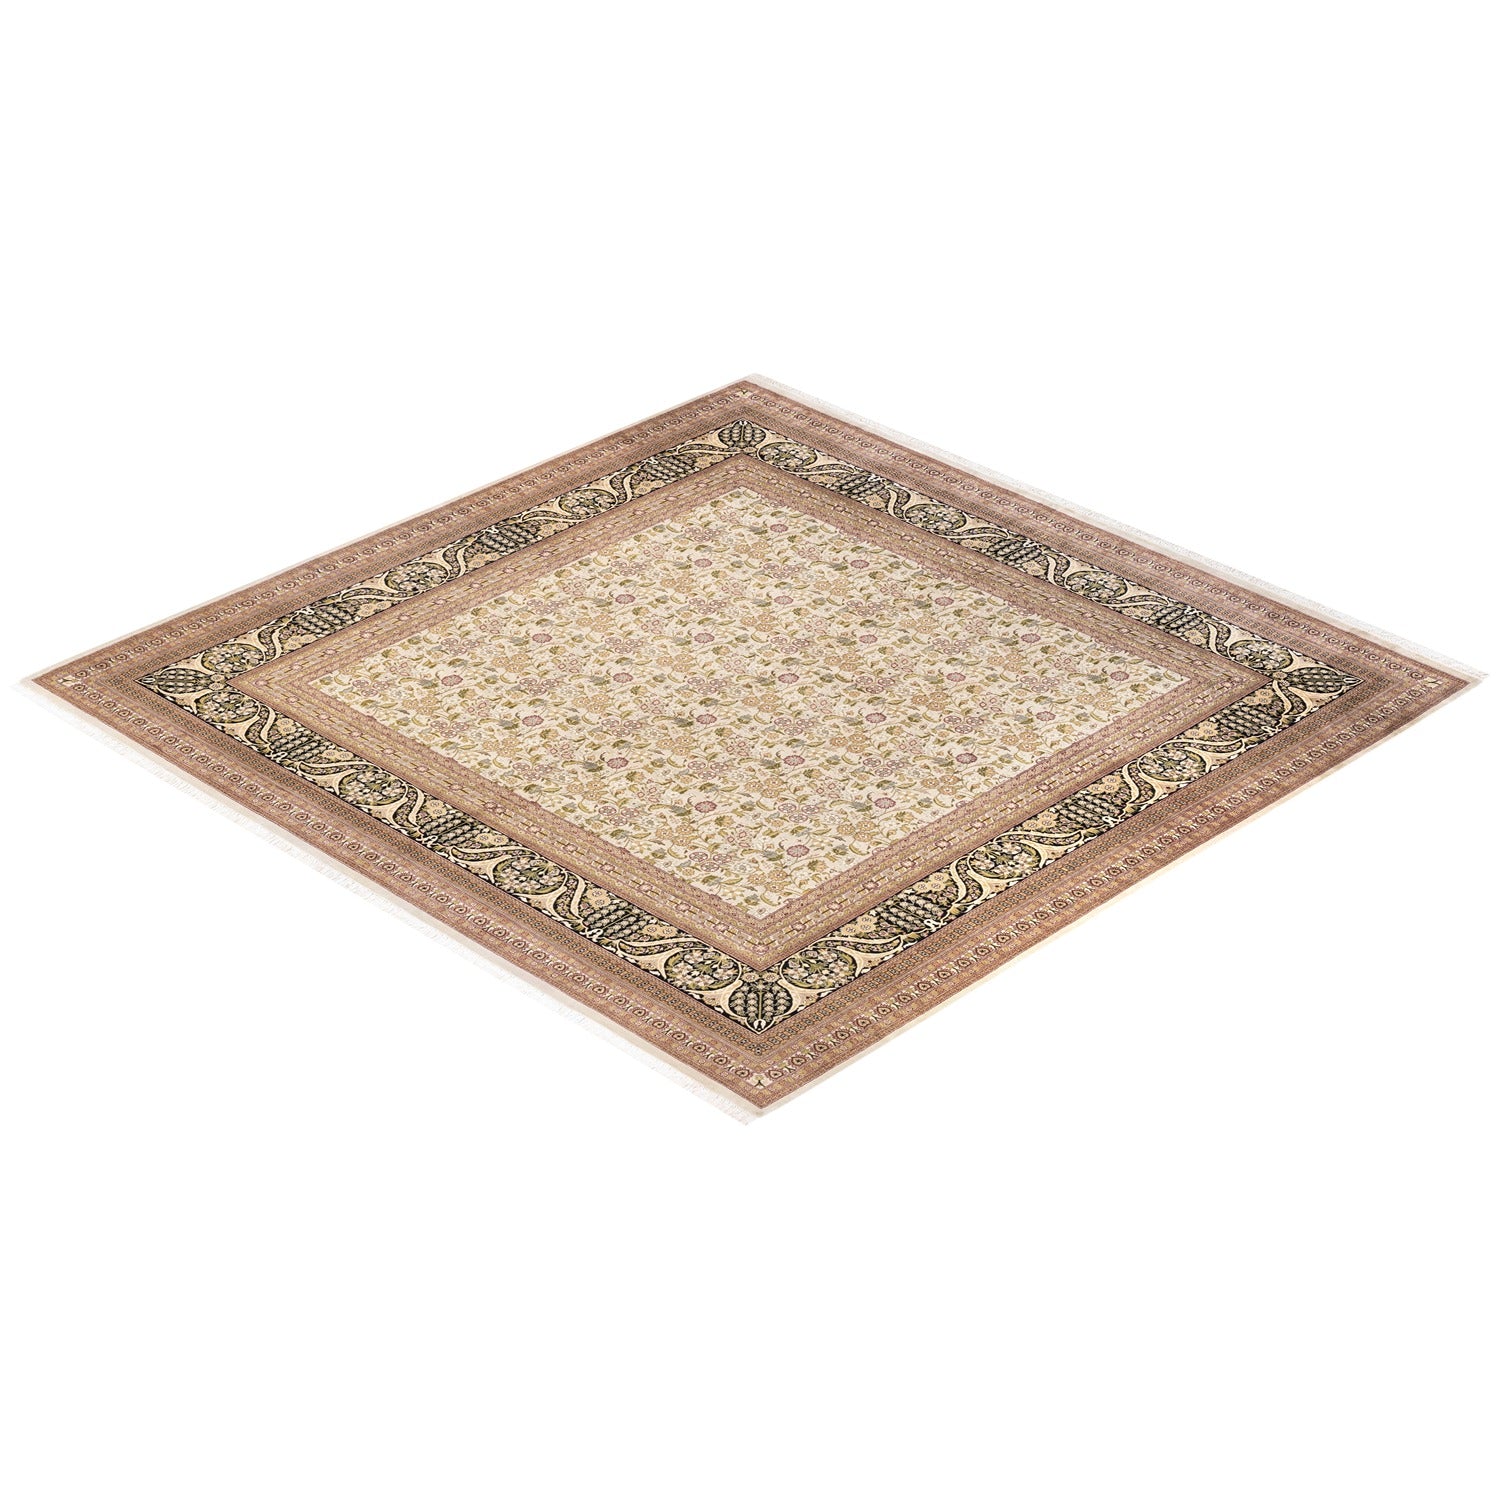 Intricate patterned area rug with floral and paisley elements displayed